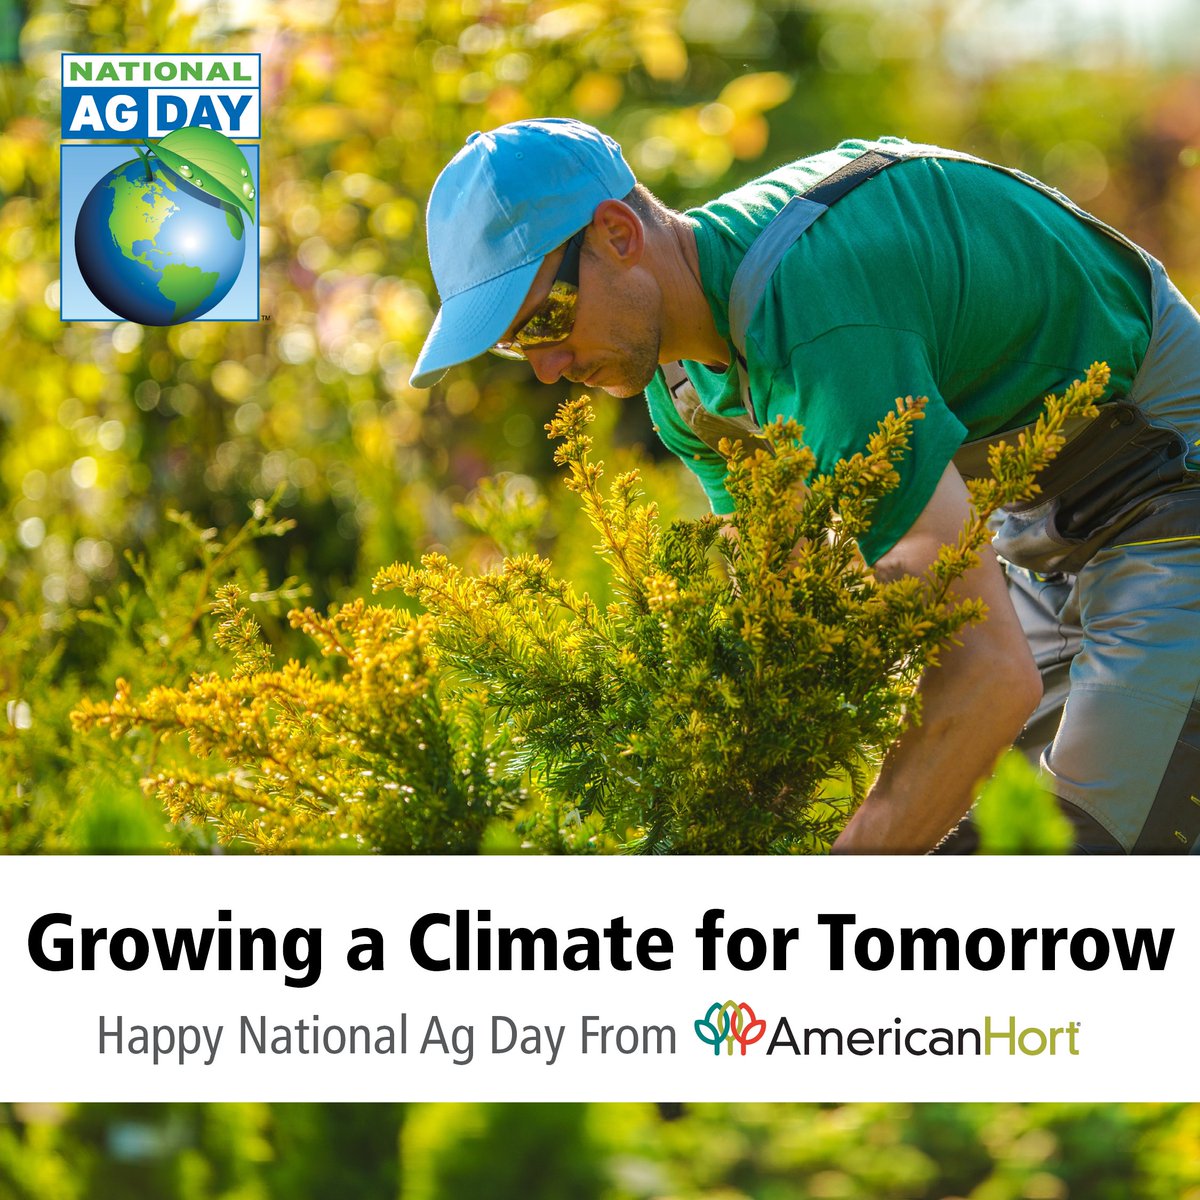 Happy #AgDay24 to the growers and horticulturalists who help make our world a more beautiful place to live! We are proud stewards of our land, water, and air as innovators committed to leaving a healthy world for future generations.